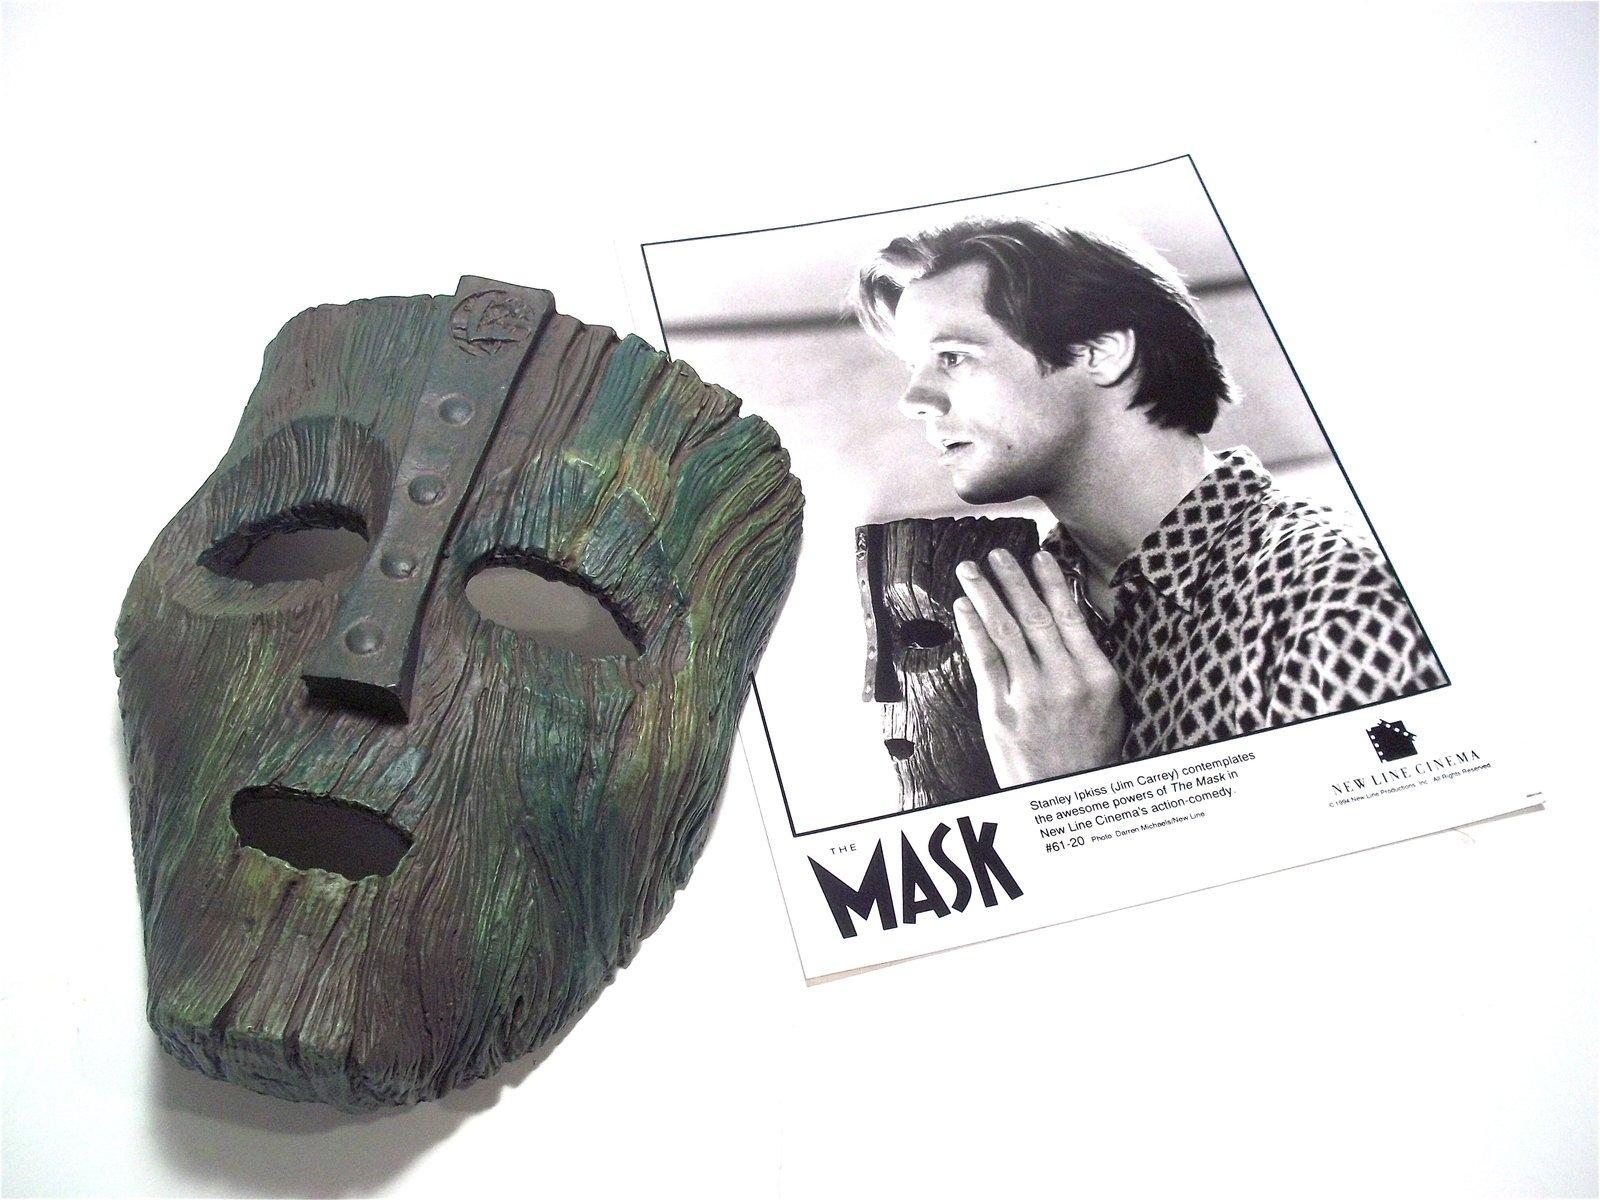 The Mask Loki Mask 1 1 Screen Accurate Cast Off Original Used